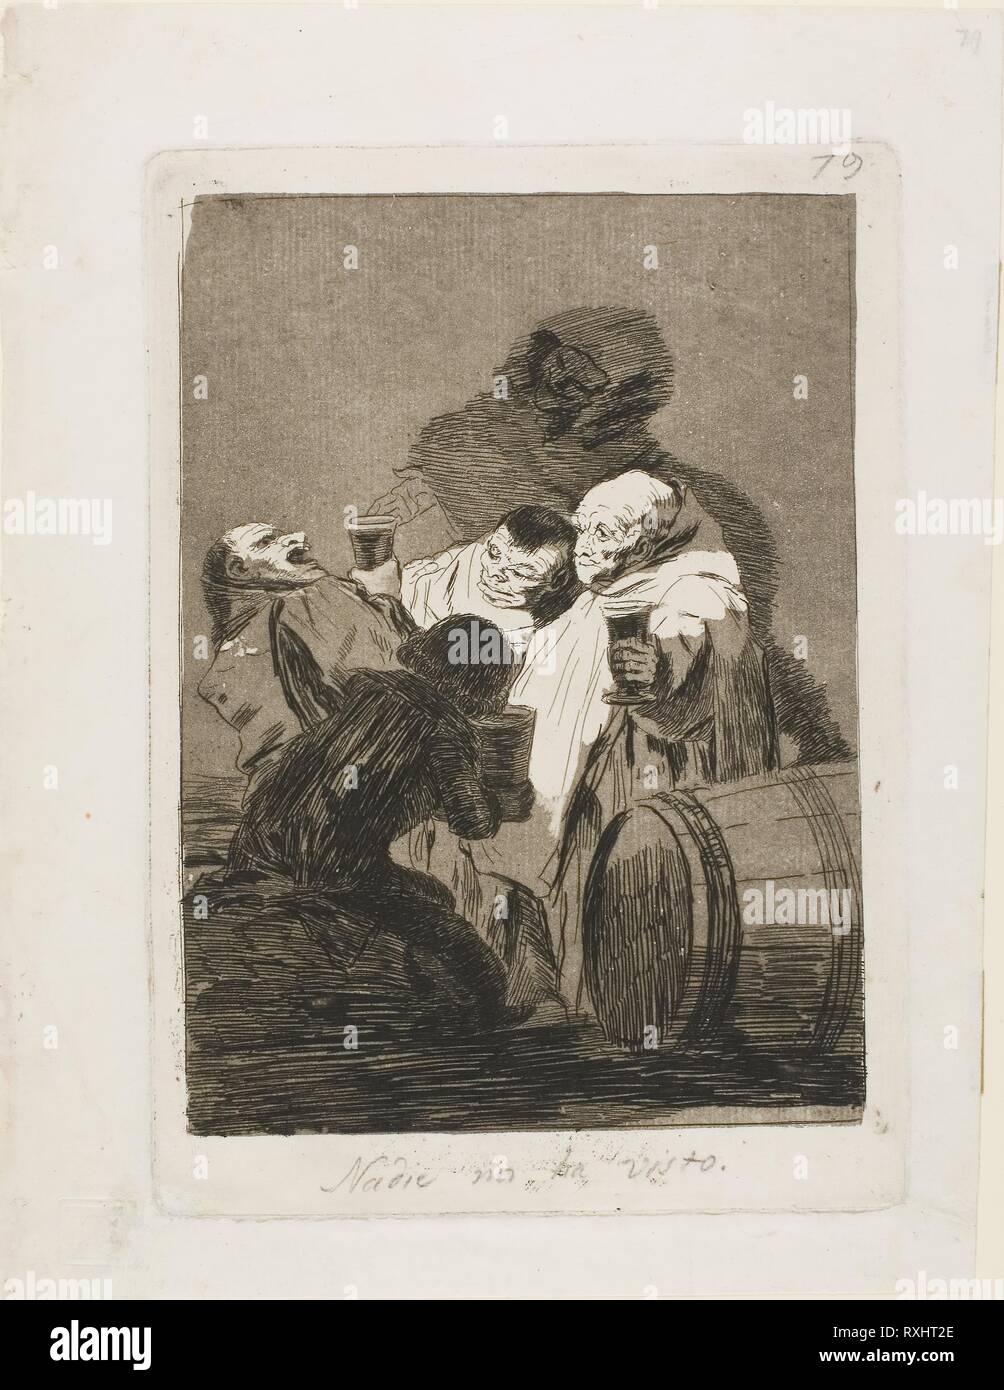 No One Has Seen Us, plate 79 from Los Caprichos. Francisco José de Goya y Lucientes; Spanish, 1746-1828. Date: 1797-1799. Dimensions: 190 x 137 mm (image); 215 x 153 mm (plate); 262 x 202 mm (sheet). Etching, burnished aquatint, and burin on white laid paper with title and number in pencil. Origin: Spain. Museum: The Chicago Art Institute. Stock Photo